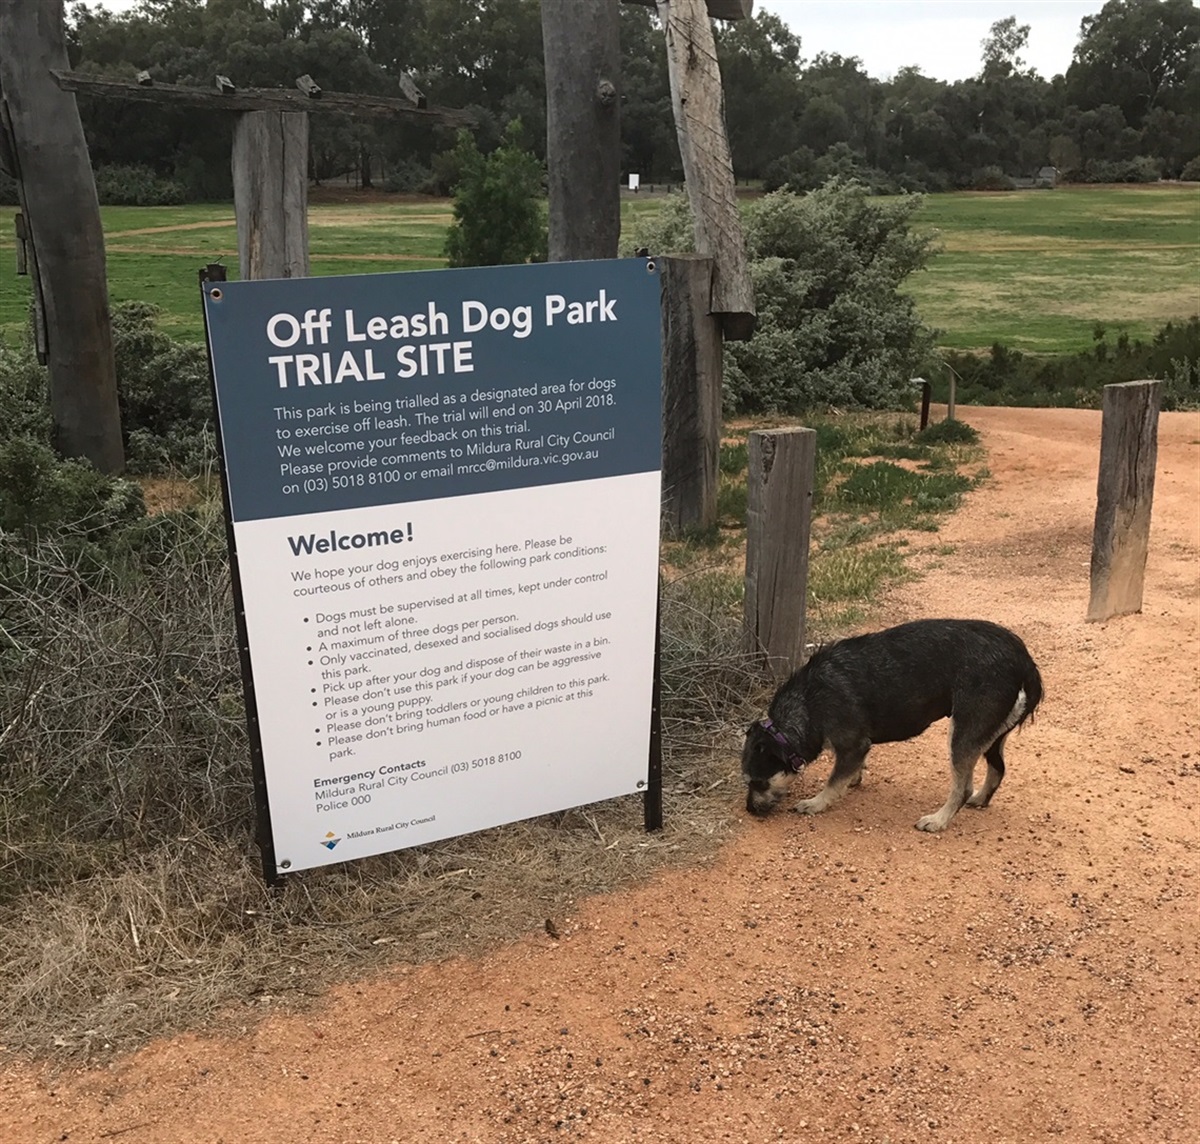 Dog off-leash park to remain open after successful trial